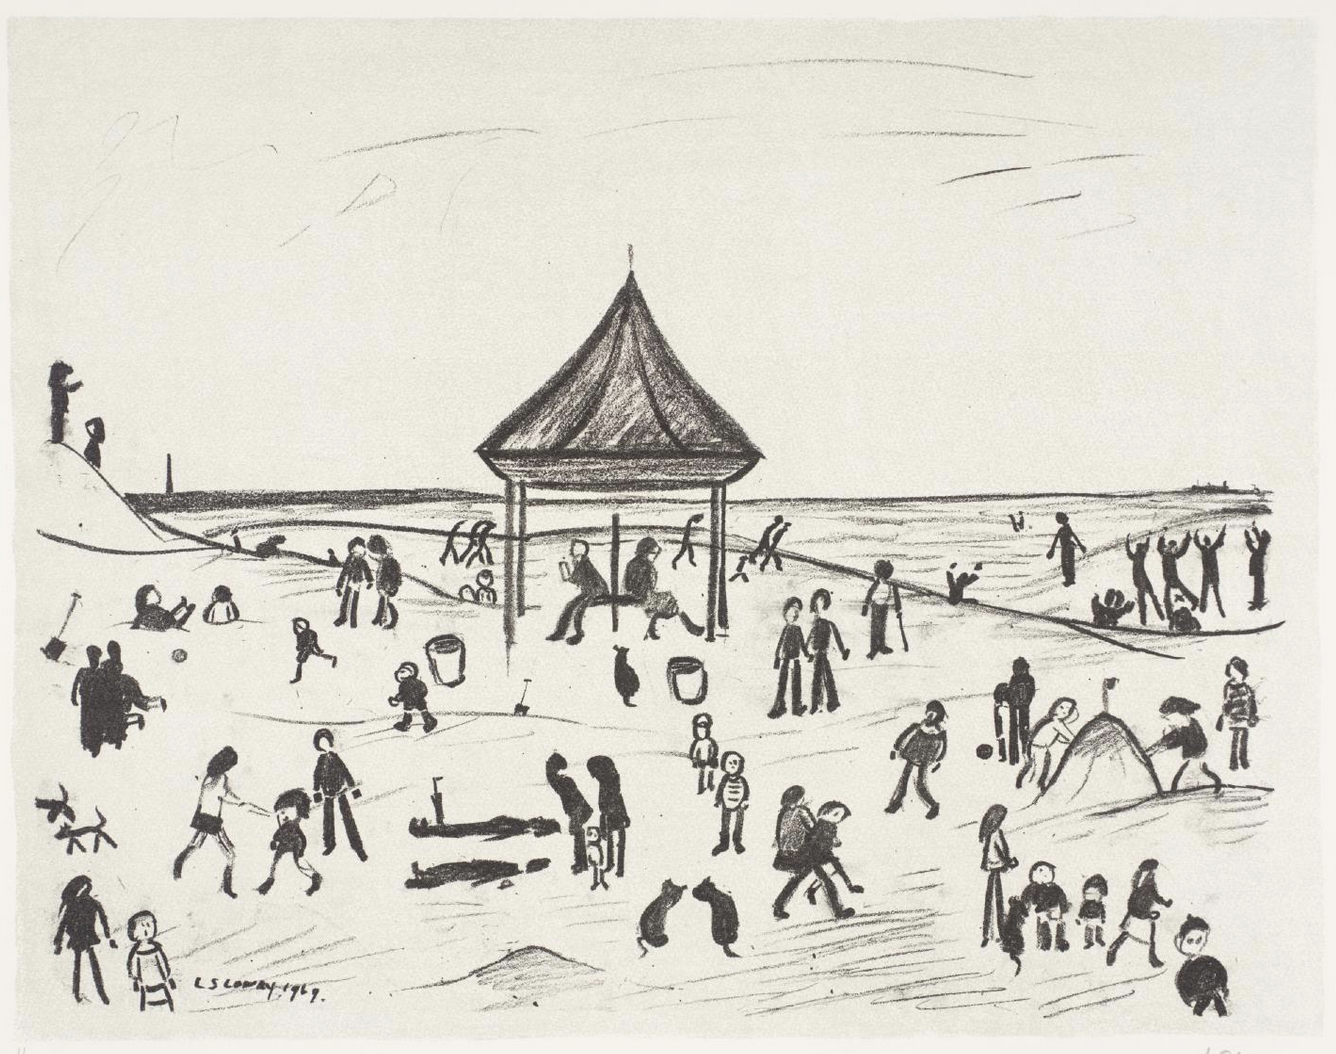 The Pavilion (1969 - 72) by Laurence Stephen Lowry (1887 - 1976), English artist.